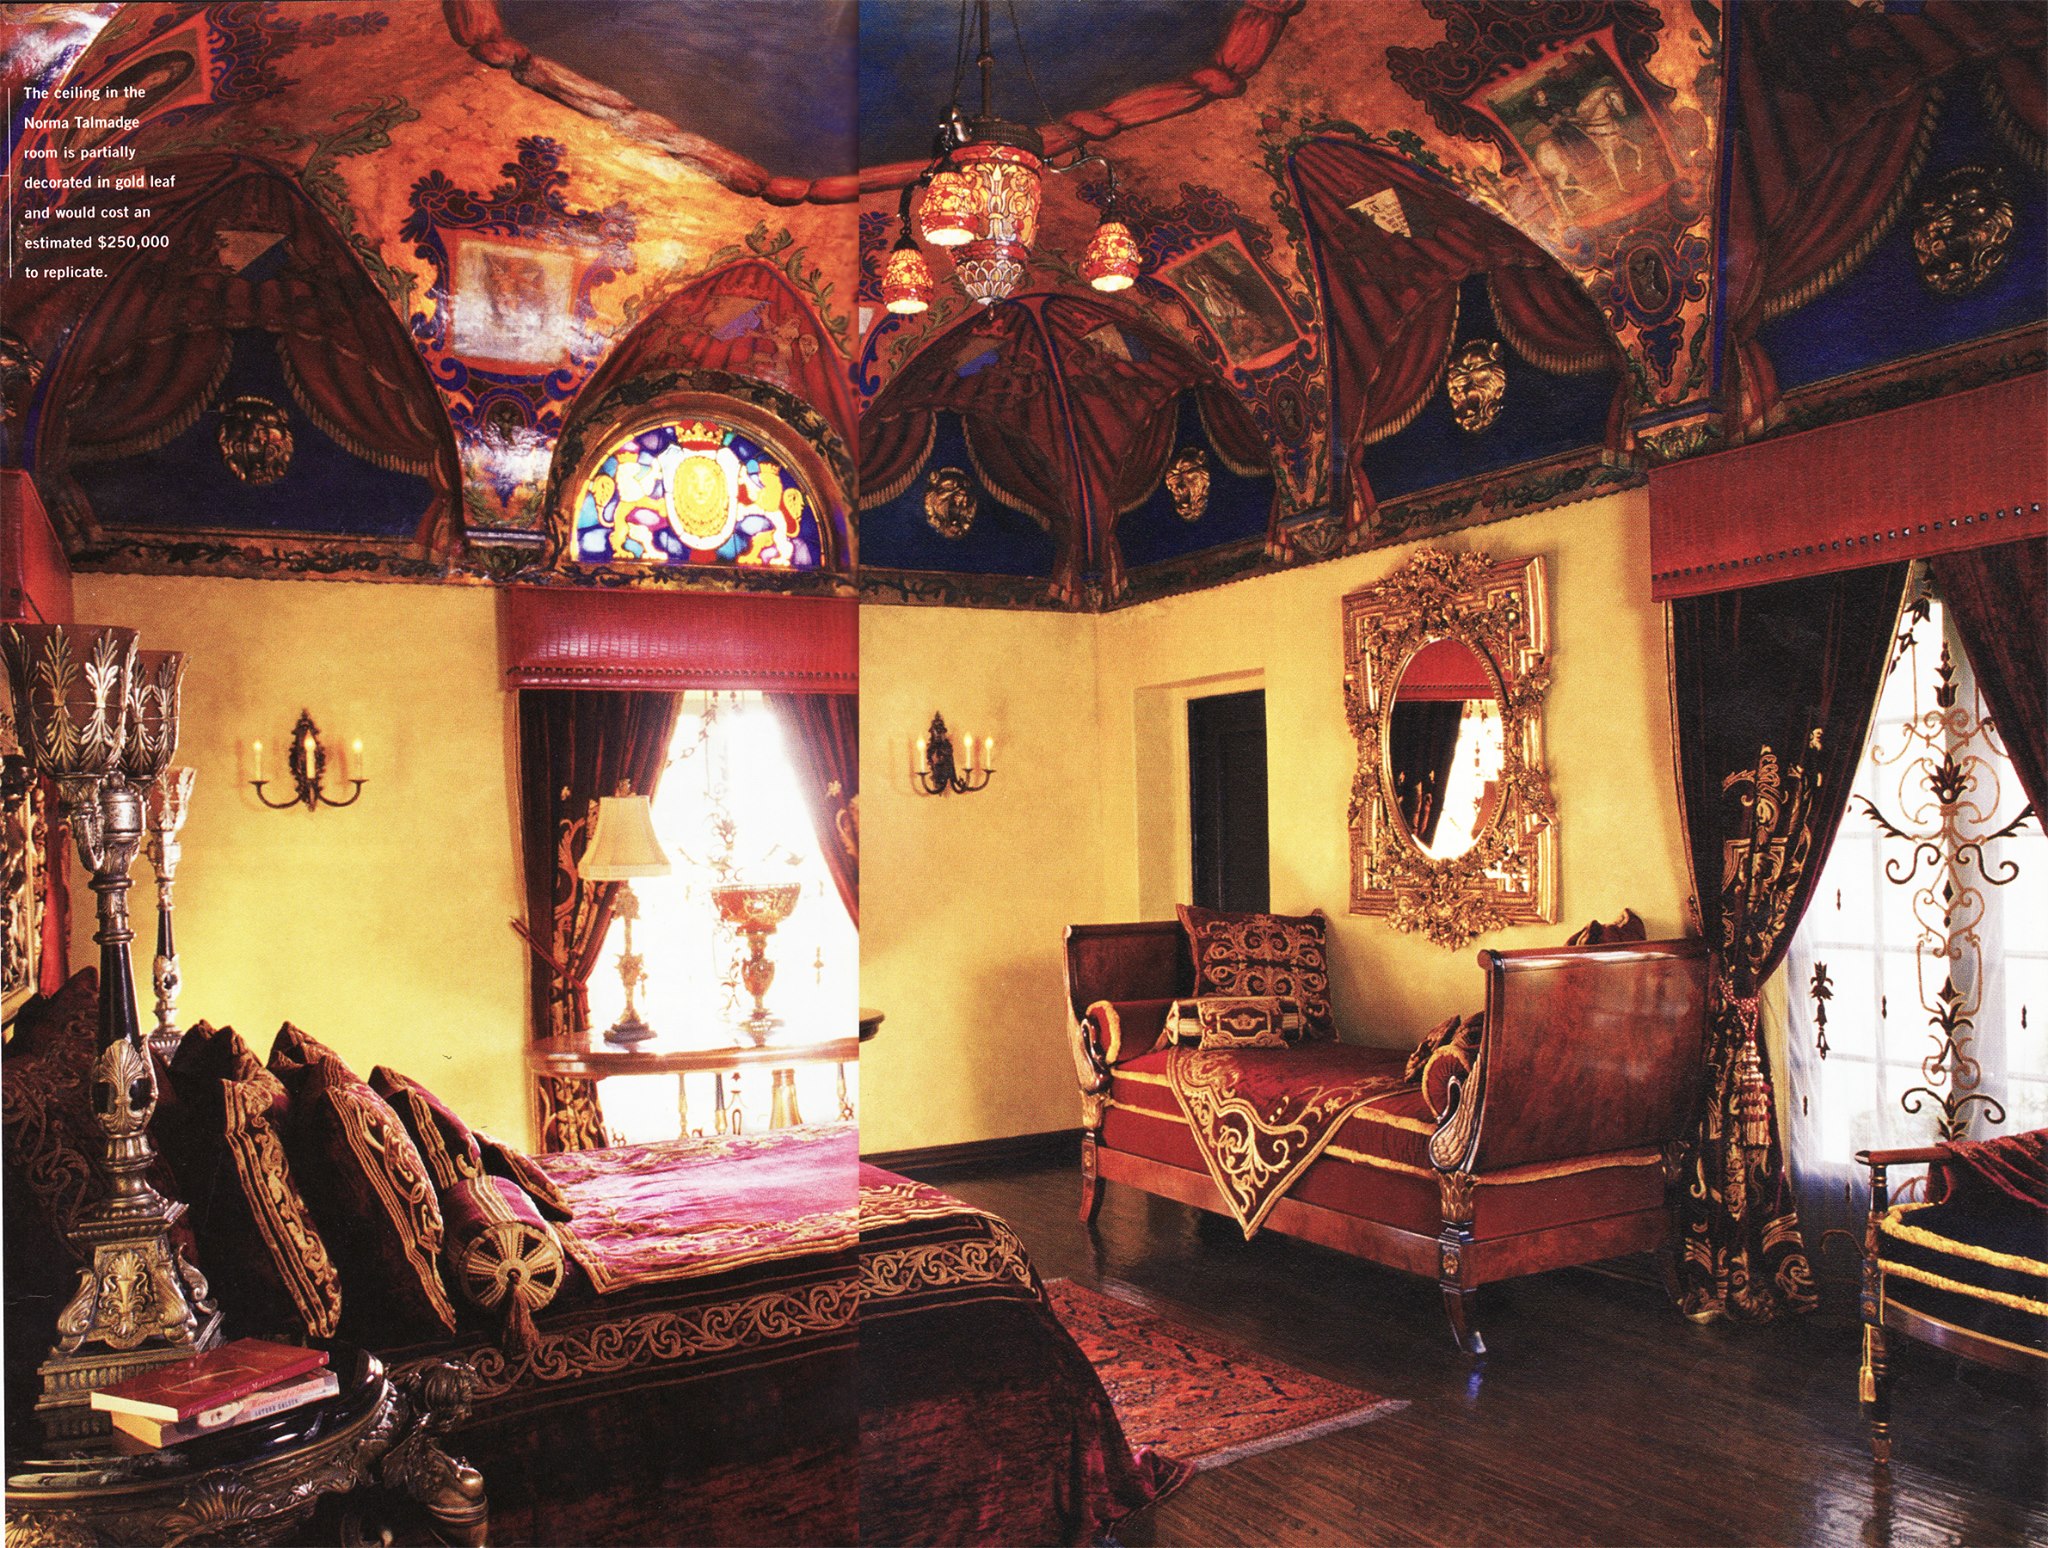 The Baroque Master Bedroom at The Cedars with a fresco domed ceiling Photo by Erhard Pfeiffer